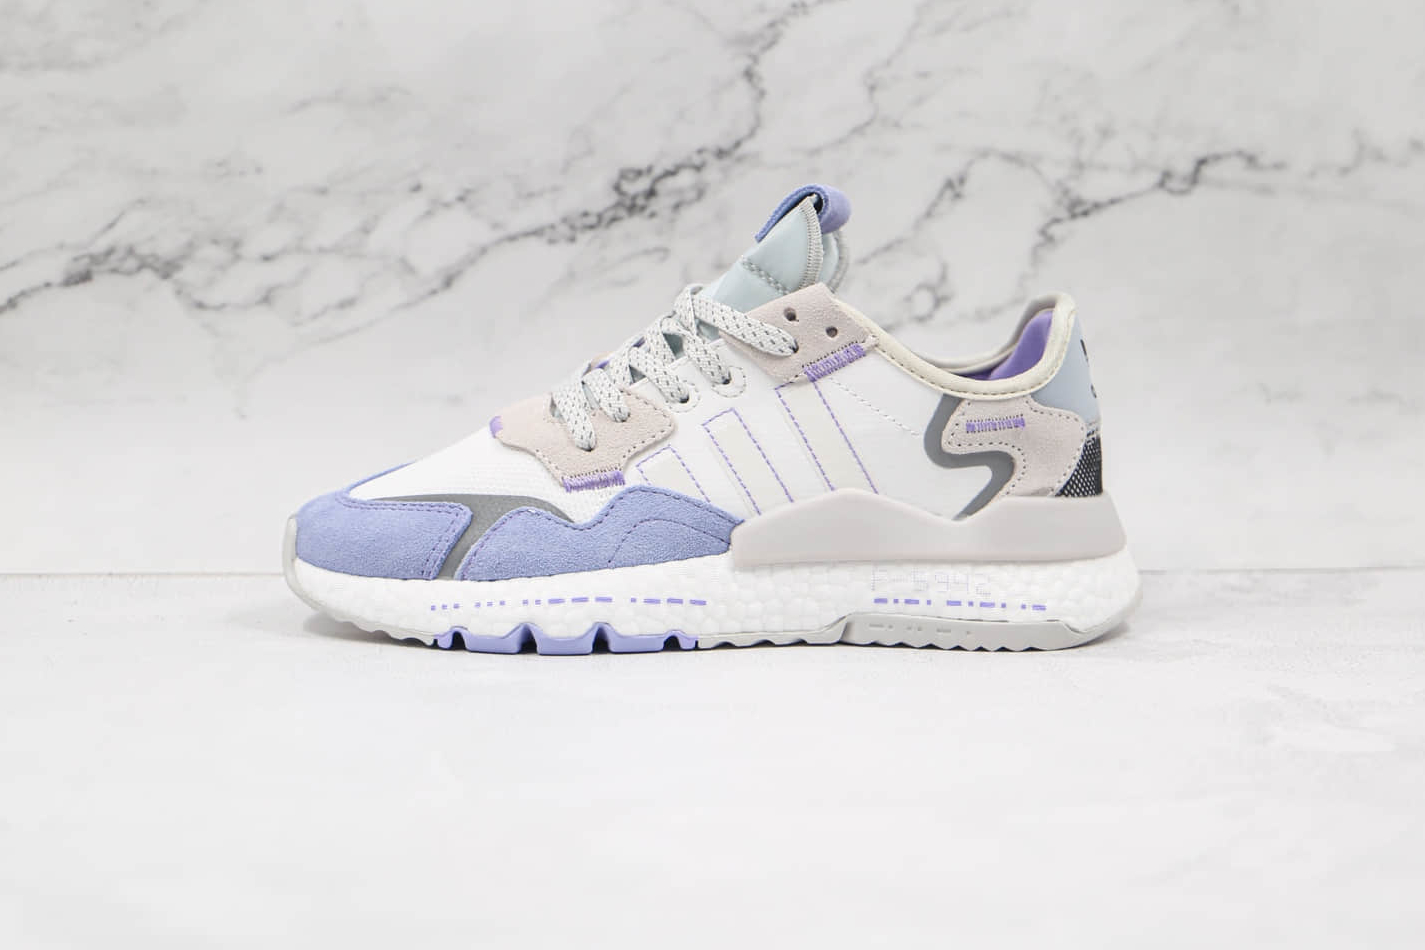 Adidas Nite Jogger 2019 Boost Cloud White Purple Grey H03250 - Stylish and Comfortable Footwear